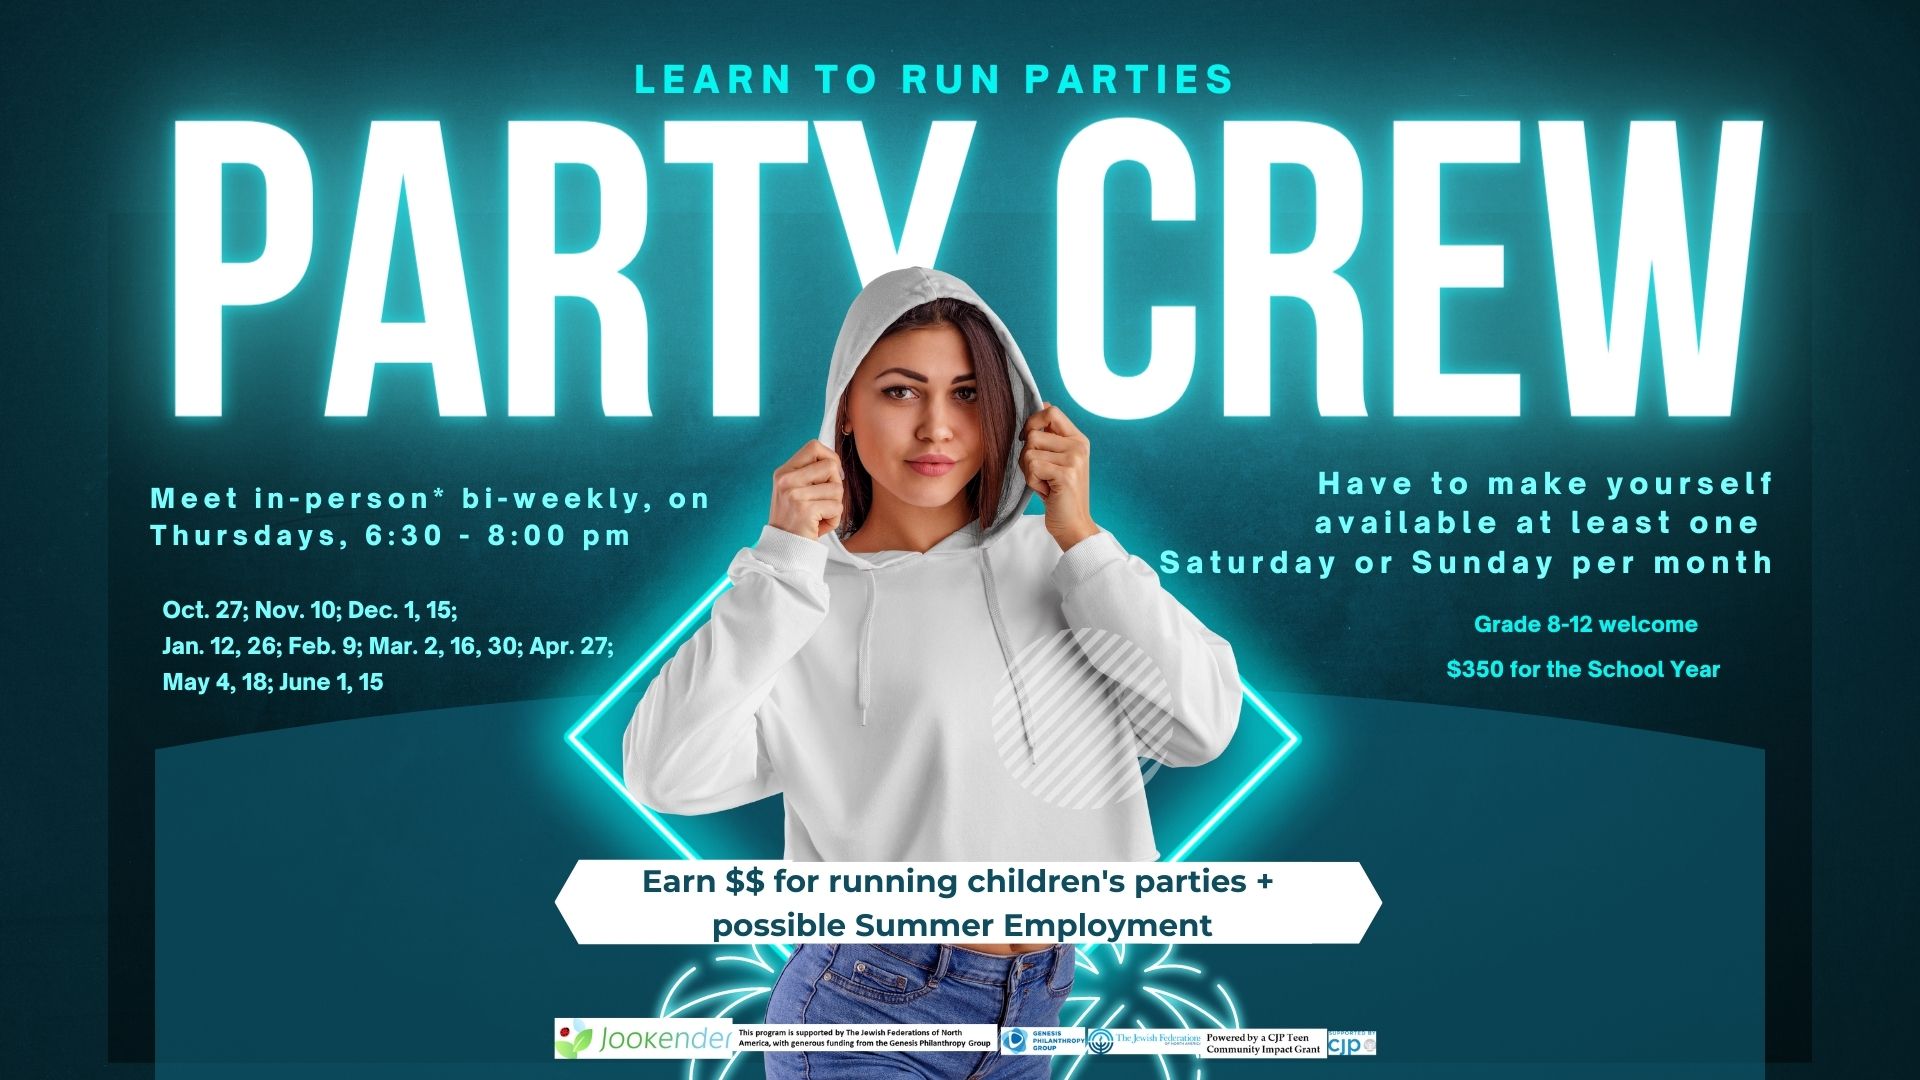 Party Crew - Learn to Run Parties